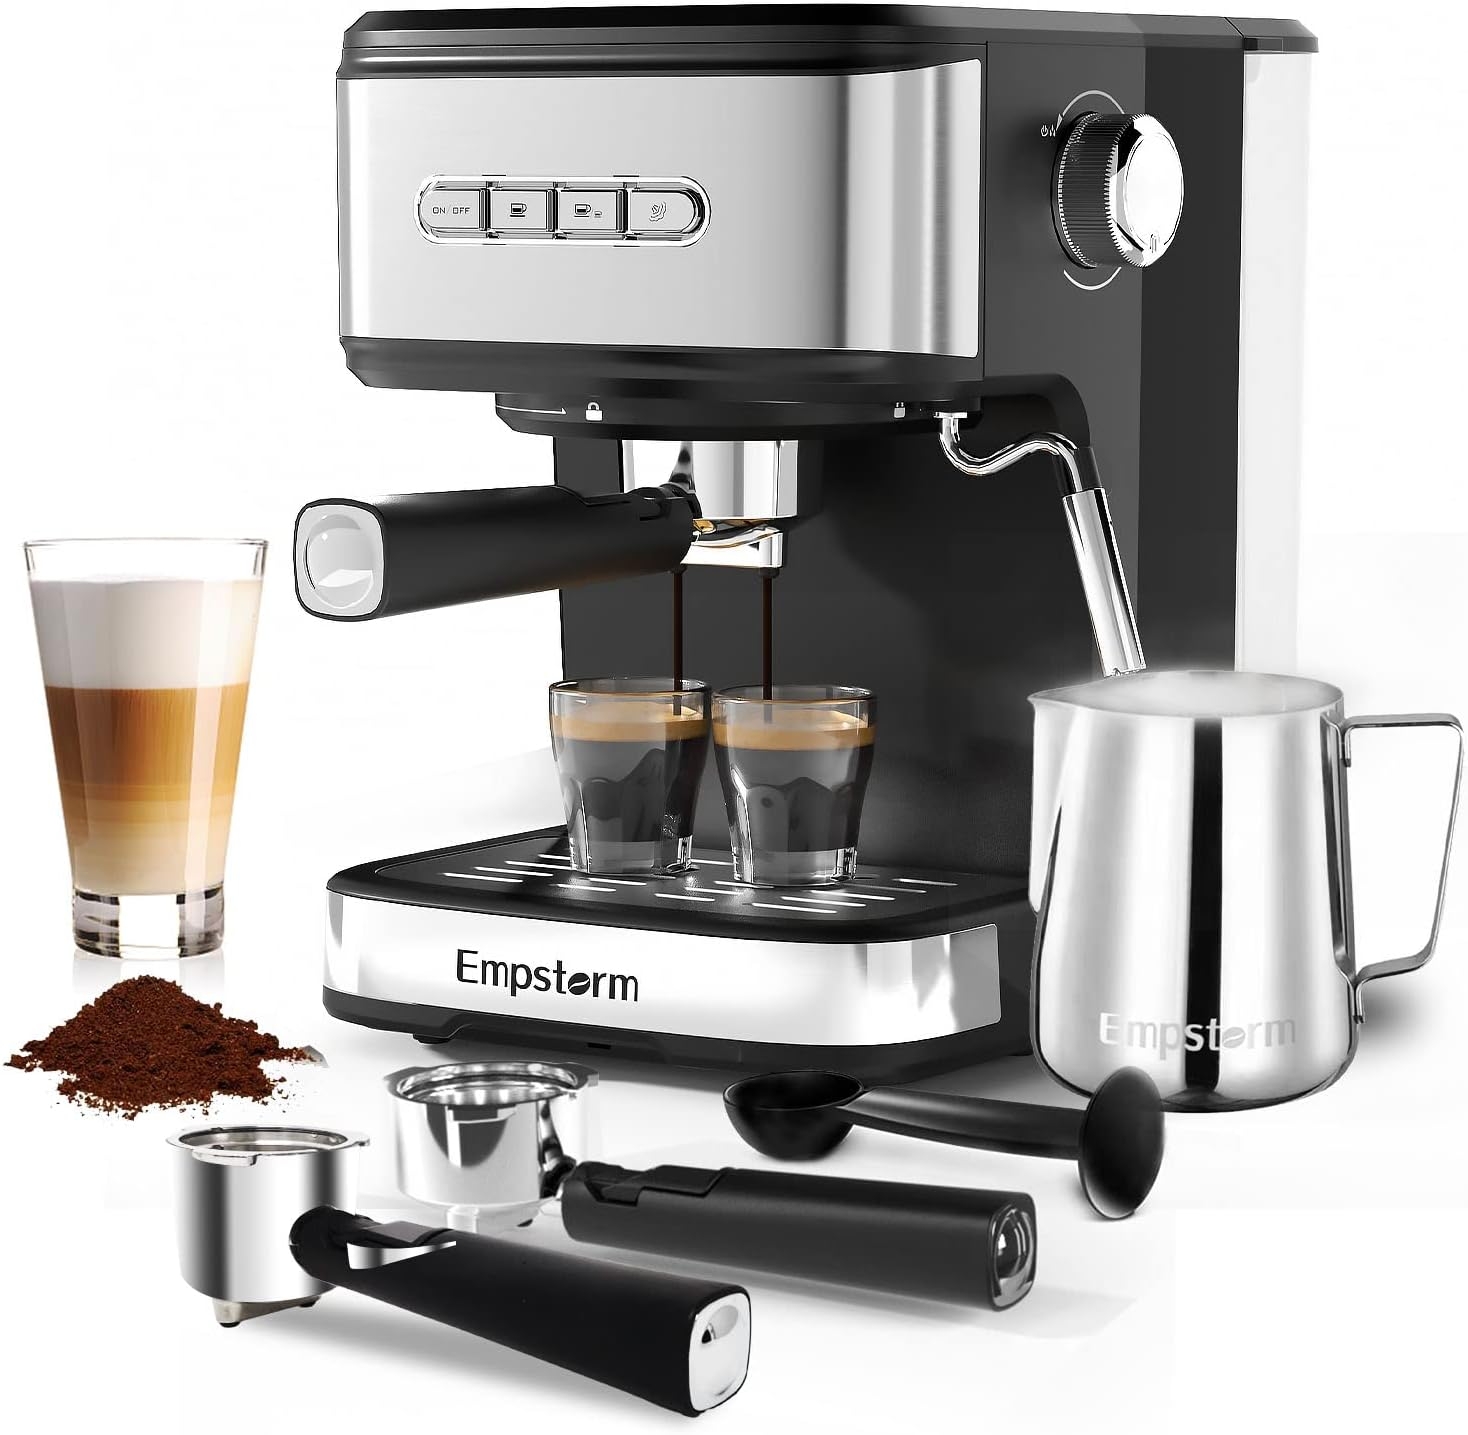 Bundle of Empstorm Espresso Machine 20 Bar, Espresso Coffee Maker with Milk  Frother Steam Wand and Empstorm Milk Frothing – Coffee Gear